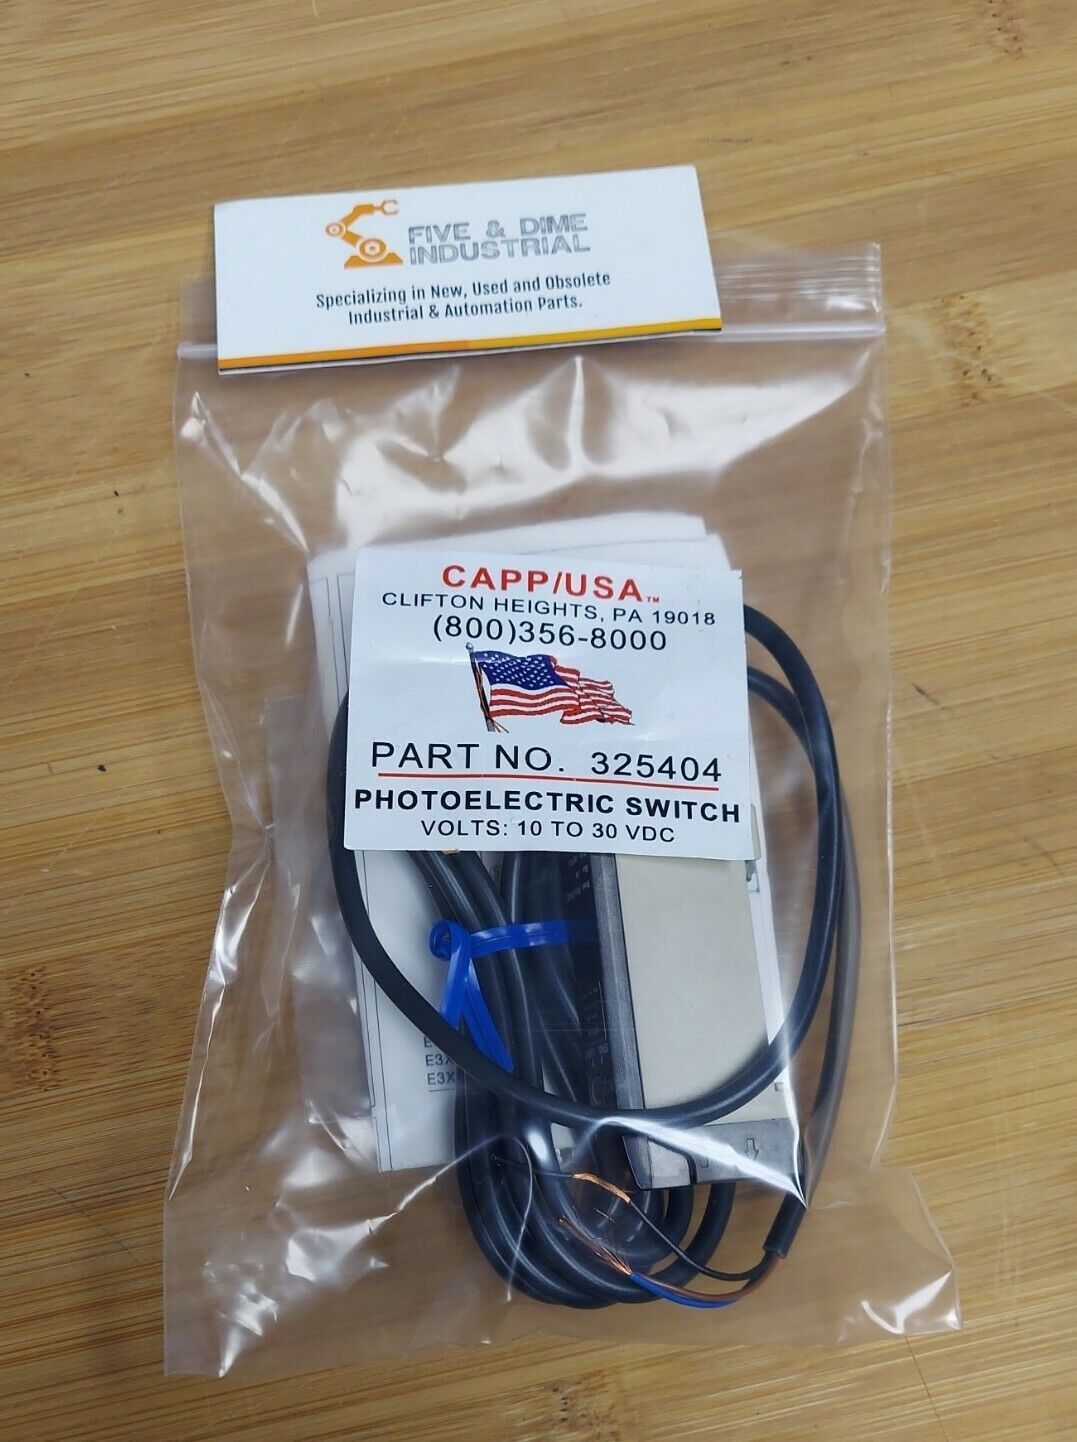 CAPP/USA PART NO. 325404 Photoelectric Switch 10-30VDC (YE122)